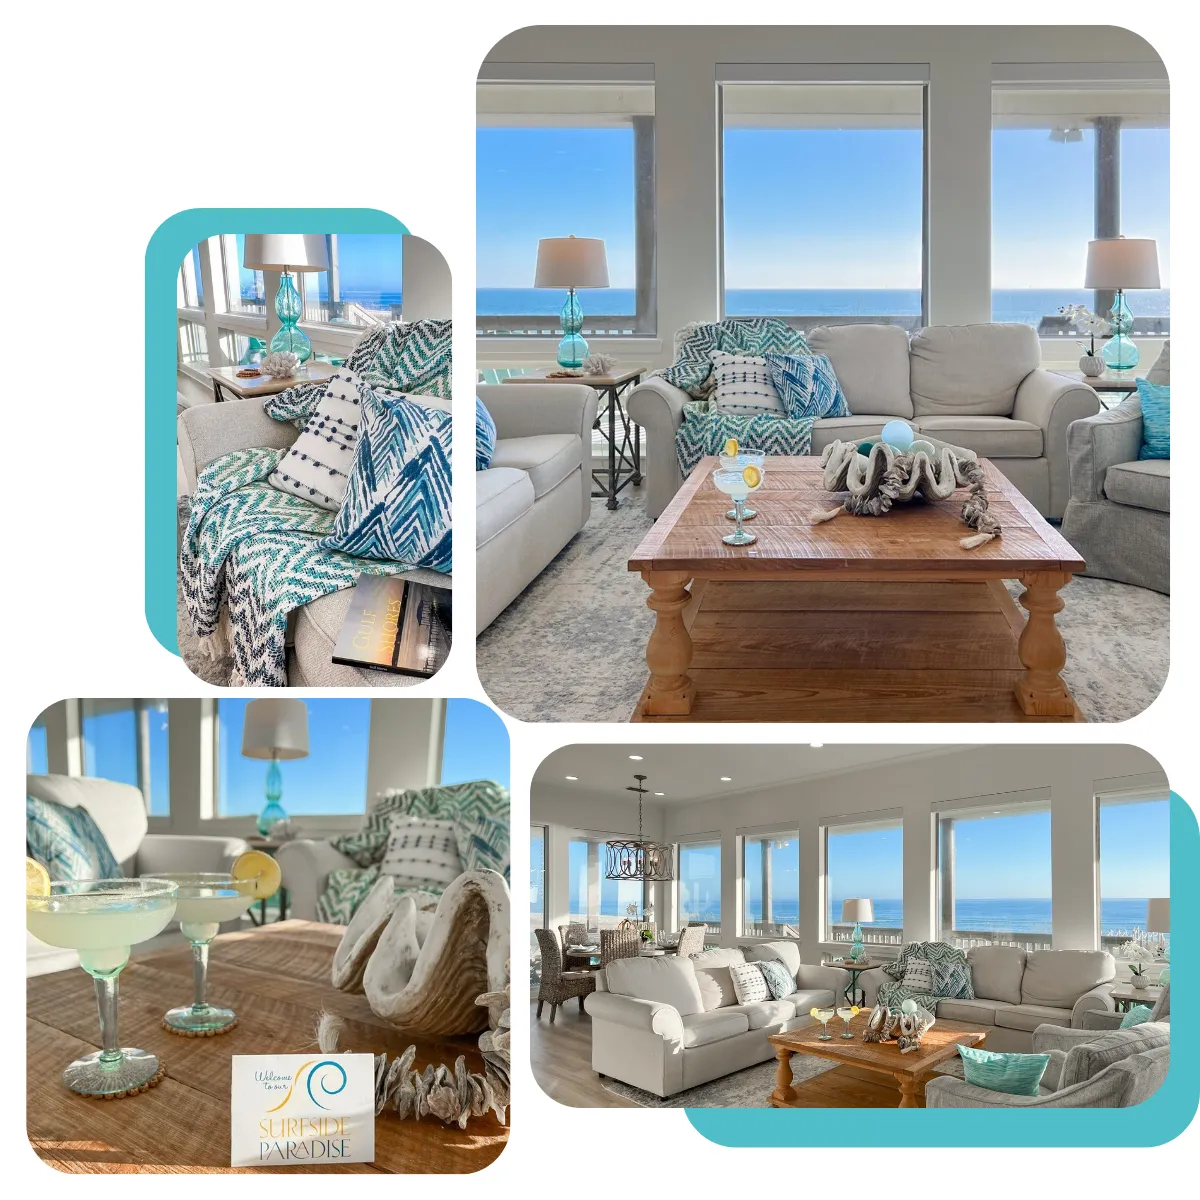 Experience the serenity of Surfside Paradise with stunning mountain and ocean views, spacious living areas, and cozy coastal décor for the ultimate beach getaway!